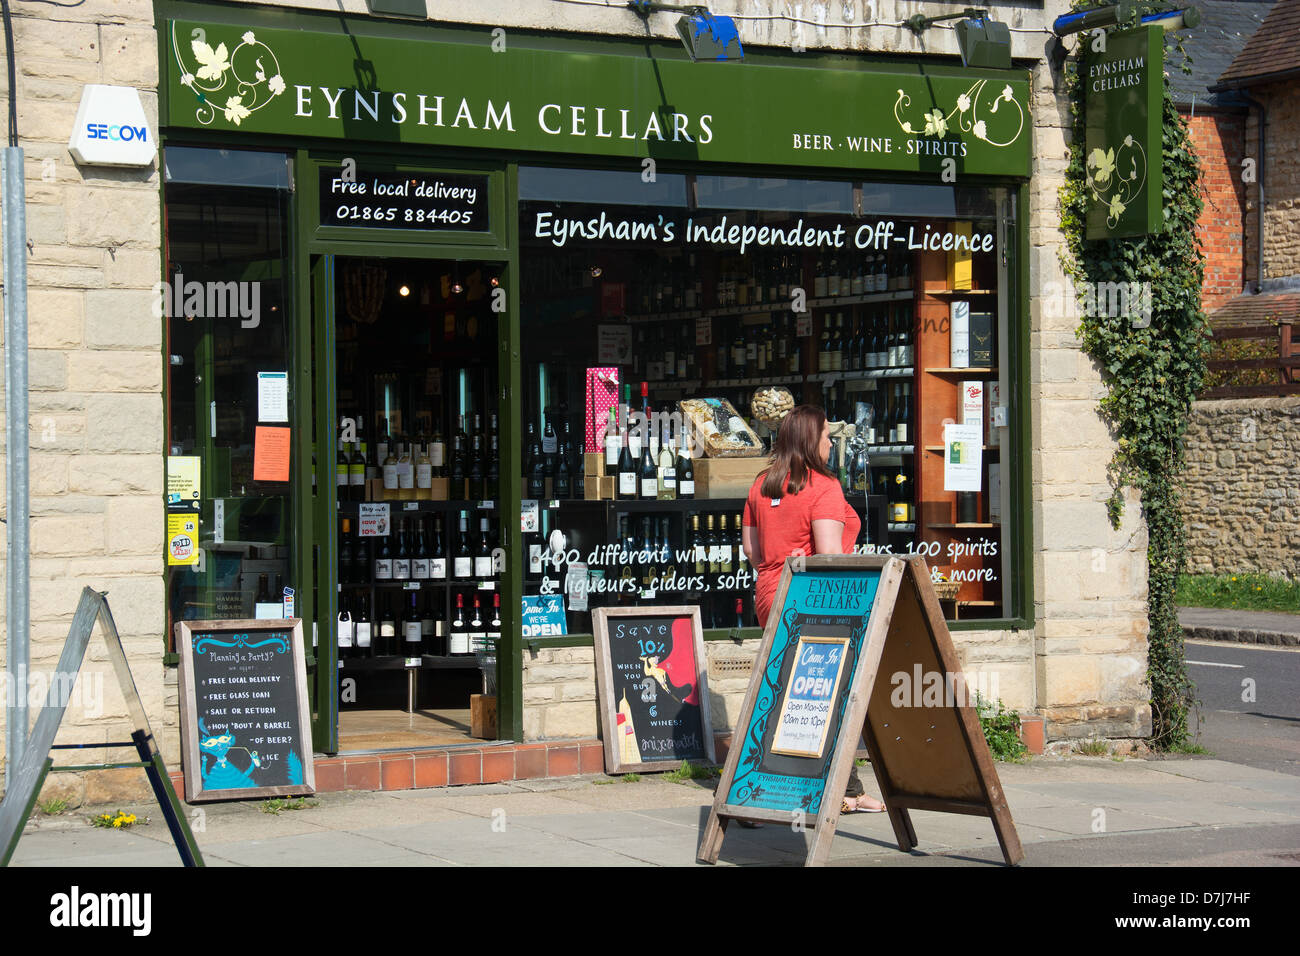 OXFORDSHIRE, UK. An independently-owned off-licence. 2013. Stock Photo